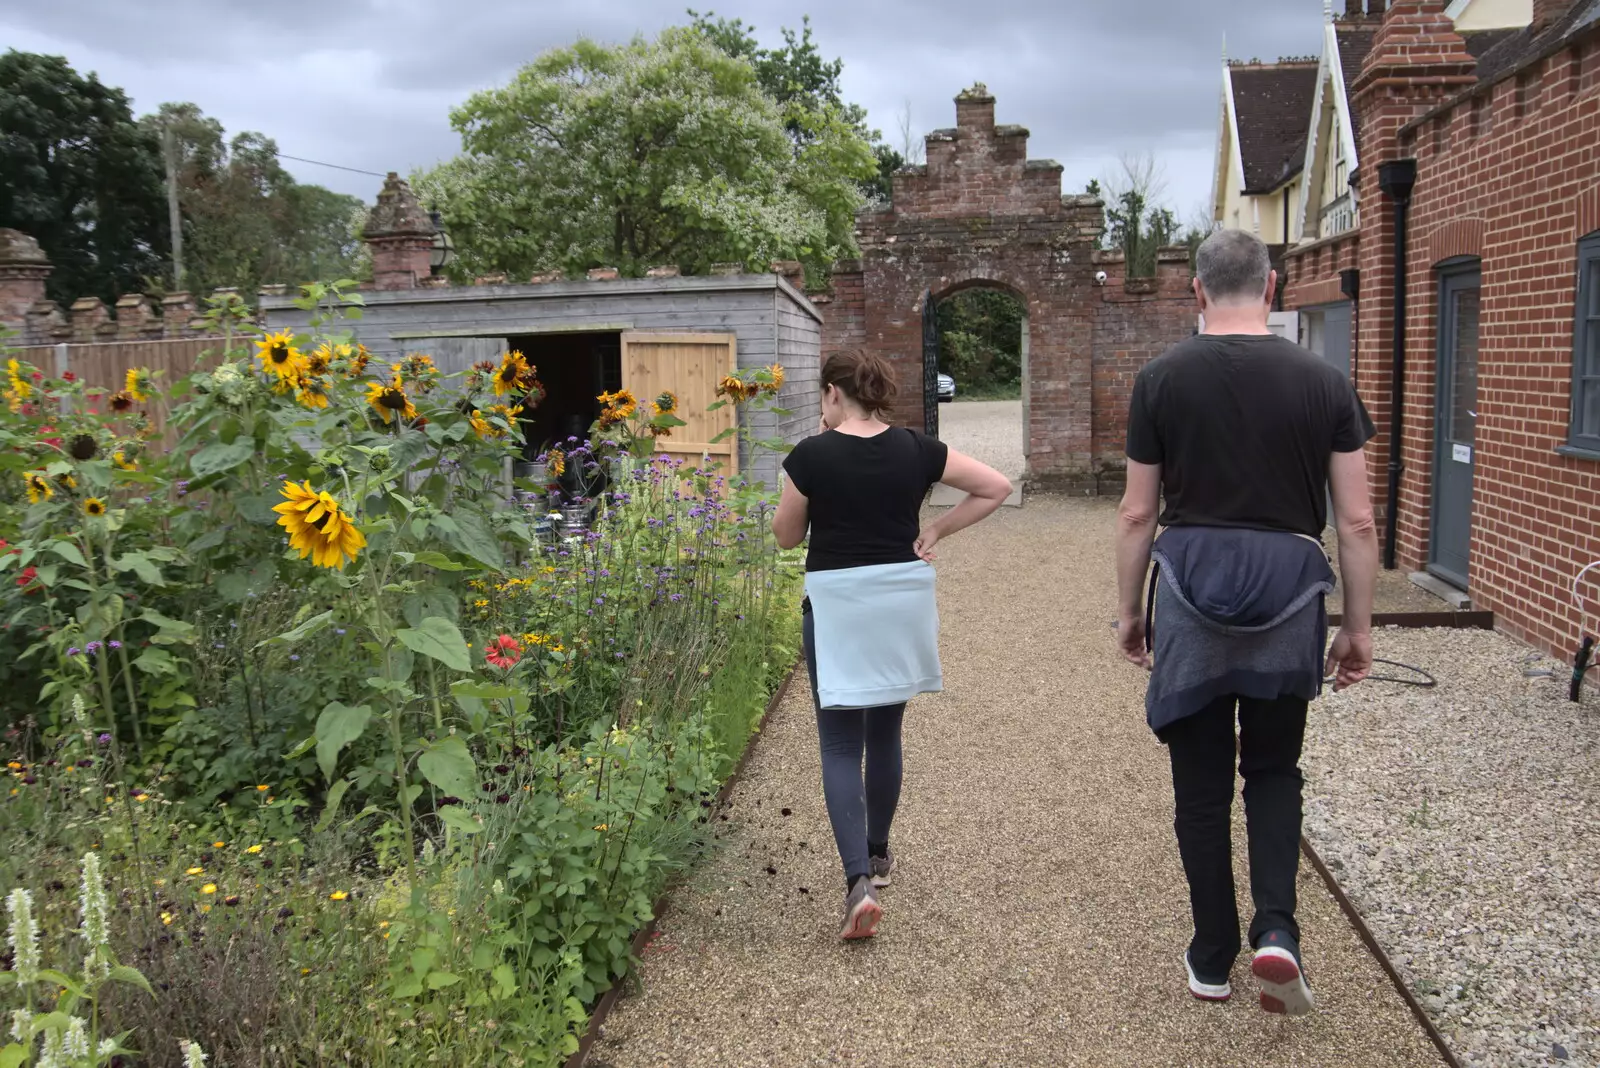 Walking past the sunflower flower bed, from Meg-fest, and Sean Visits, Bressingham and Brome, Suffolk - 1st August 2021